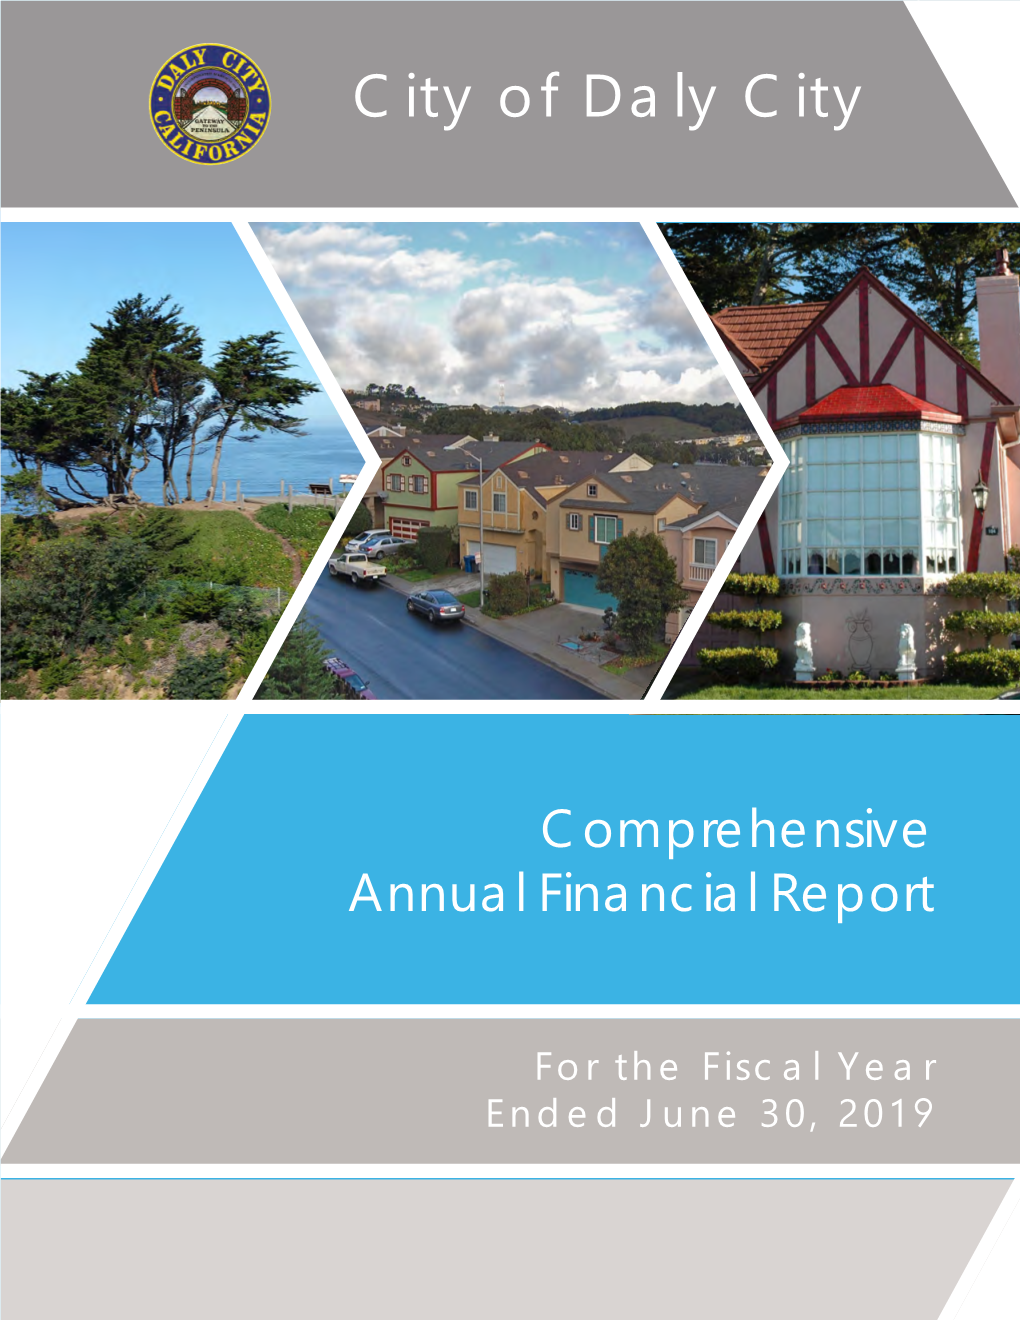 Fiscal Year 2019 Annual Financial Report